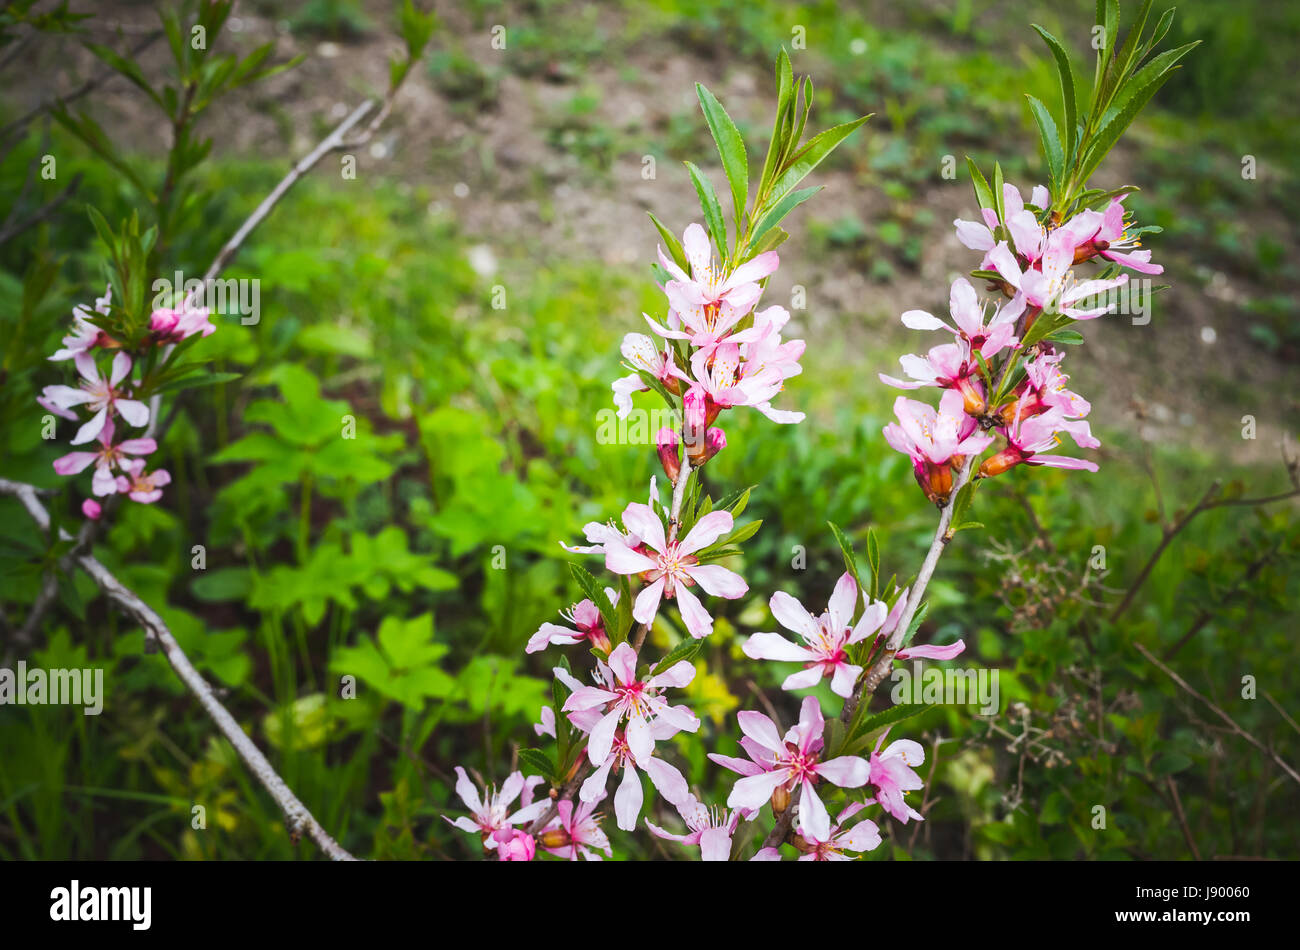 Almond tree in bloom. Bright pink flowers on branches in a spring garden, close-up photo with selective focus Stock Photo